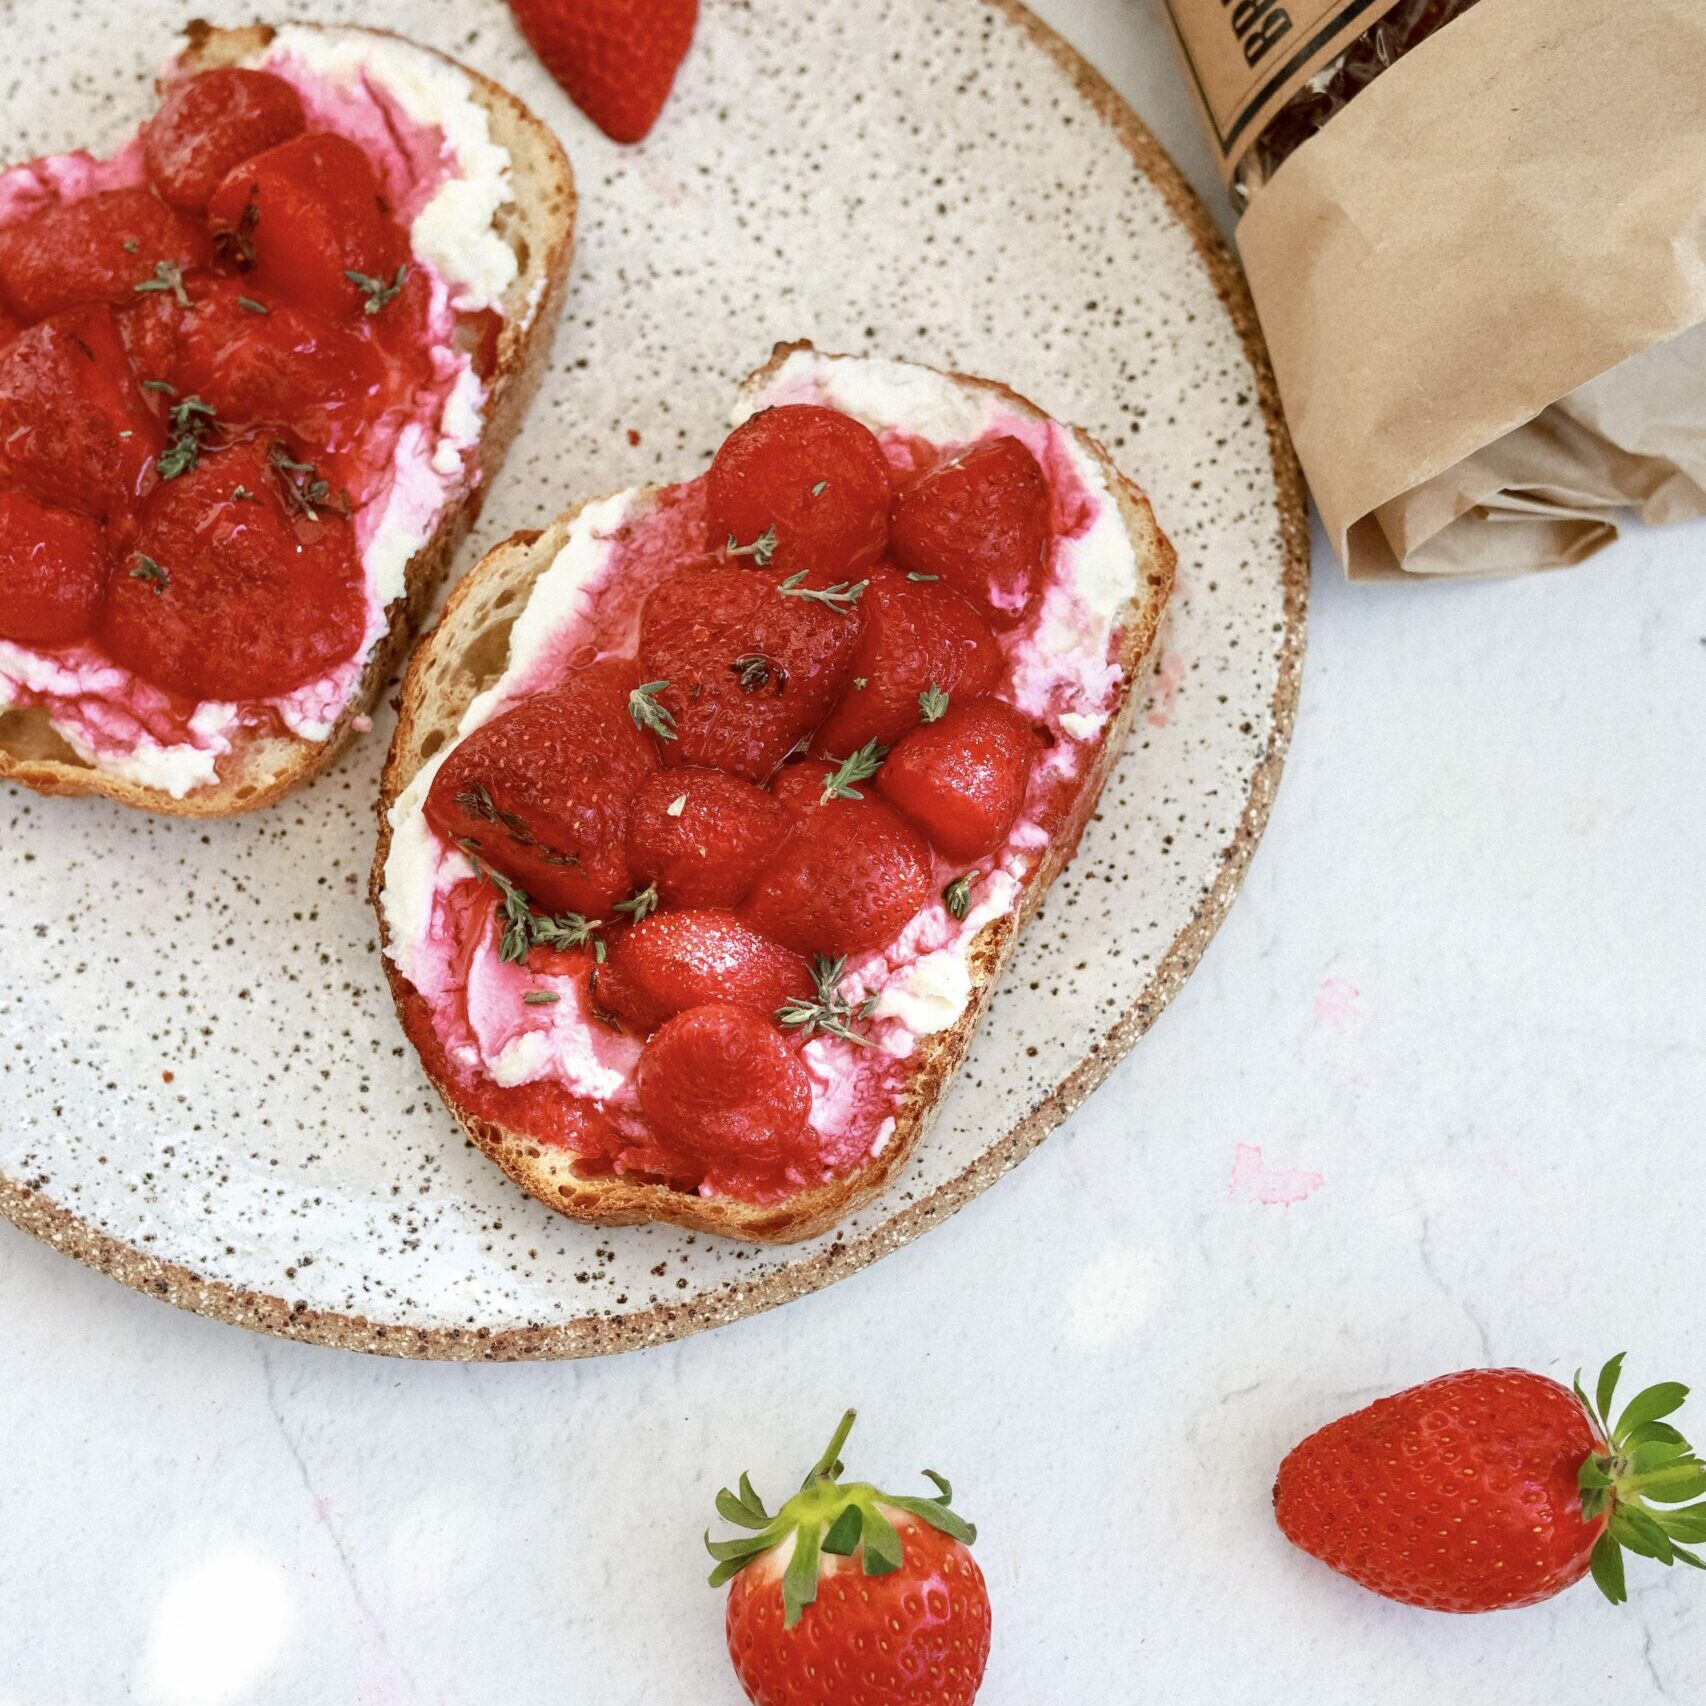 Toasted Strawberries on Sourdough